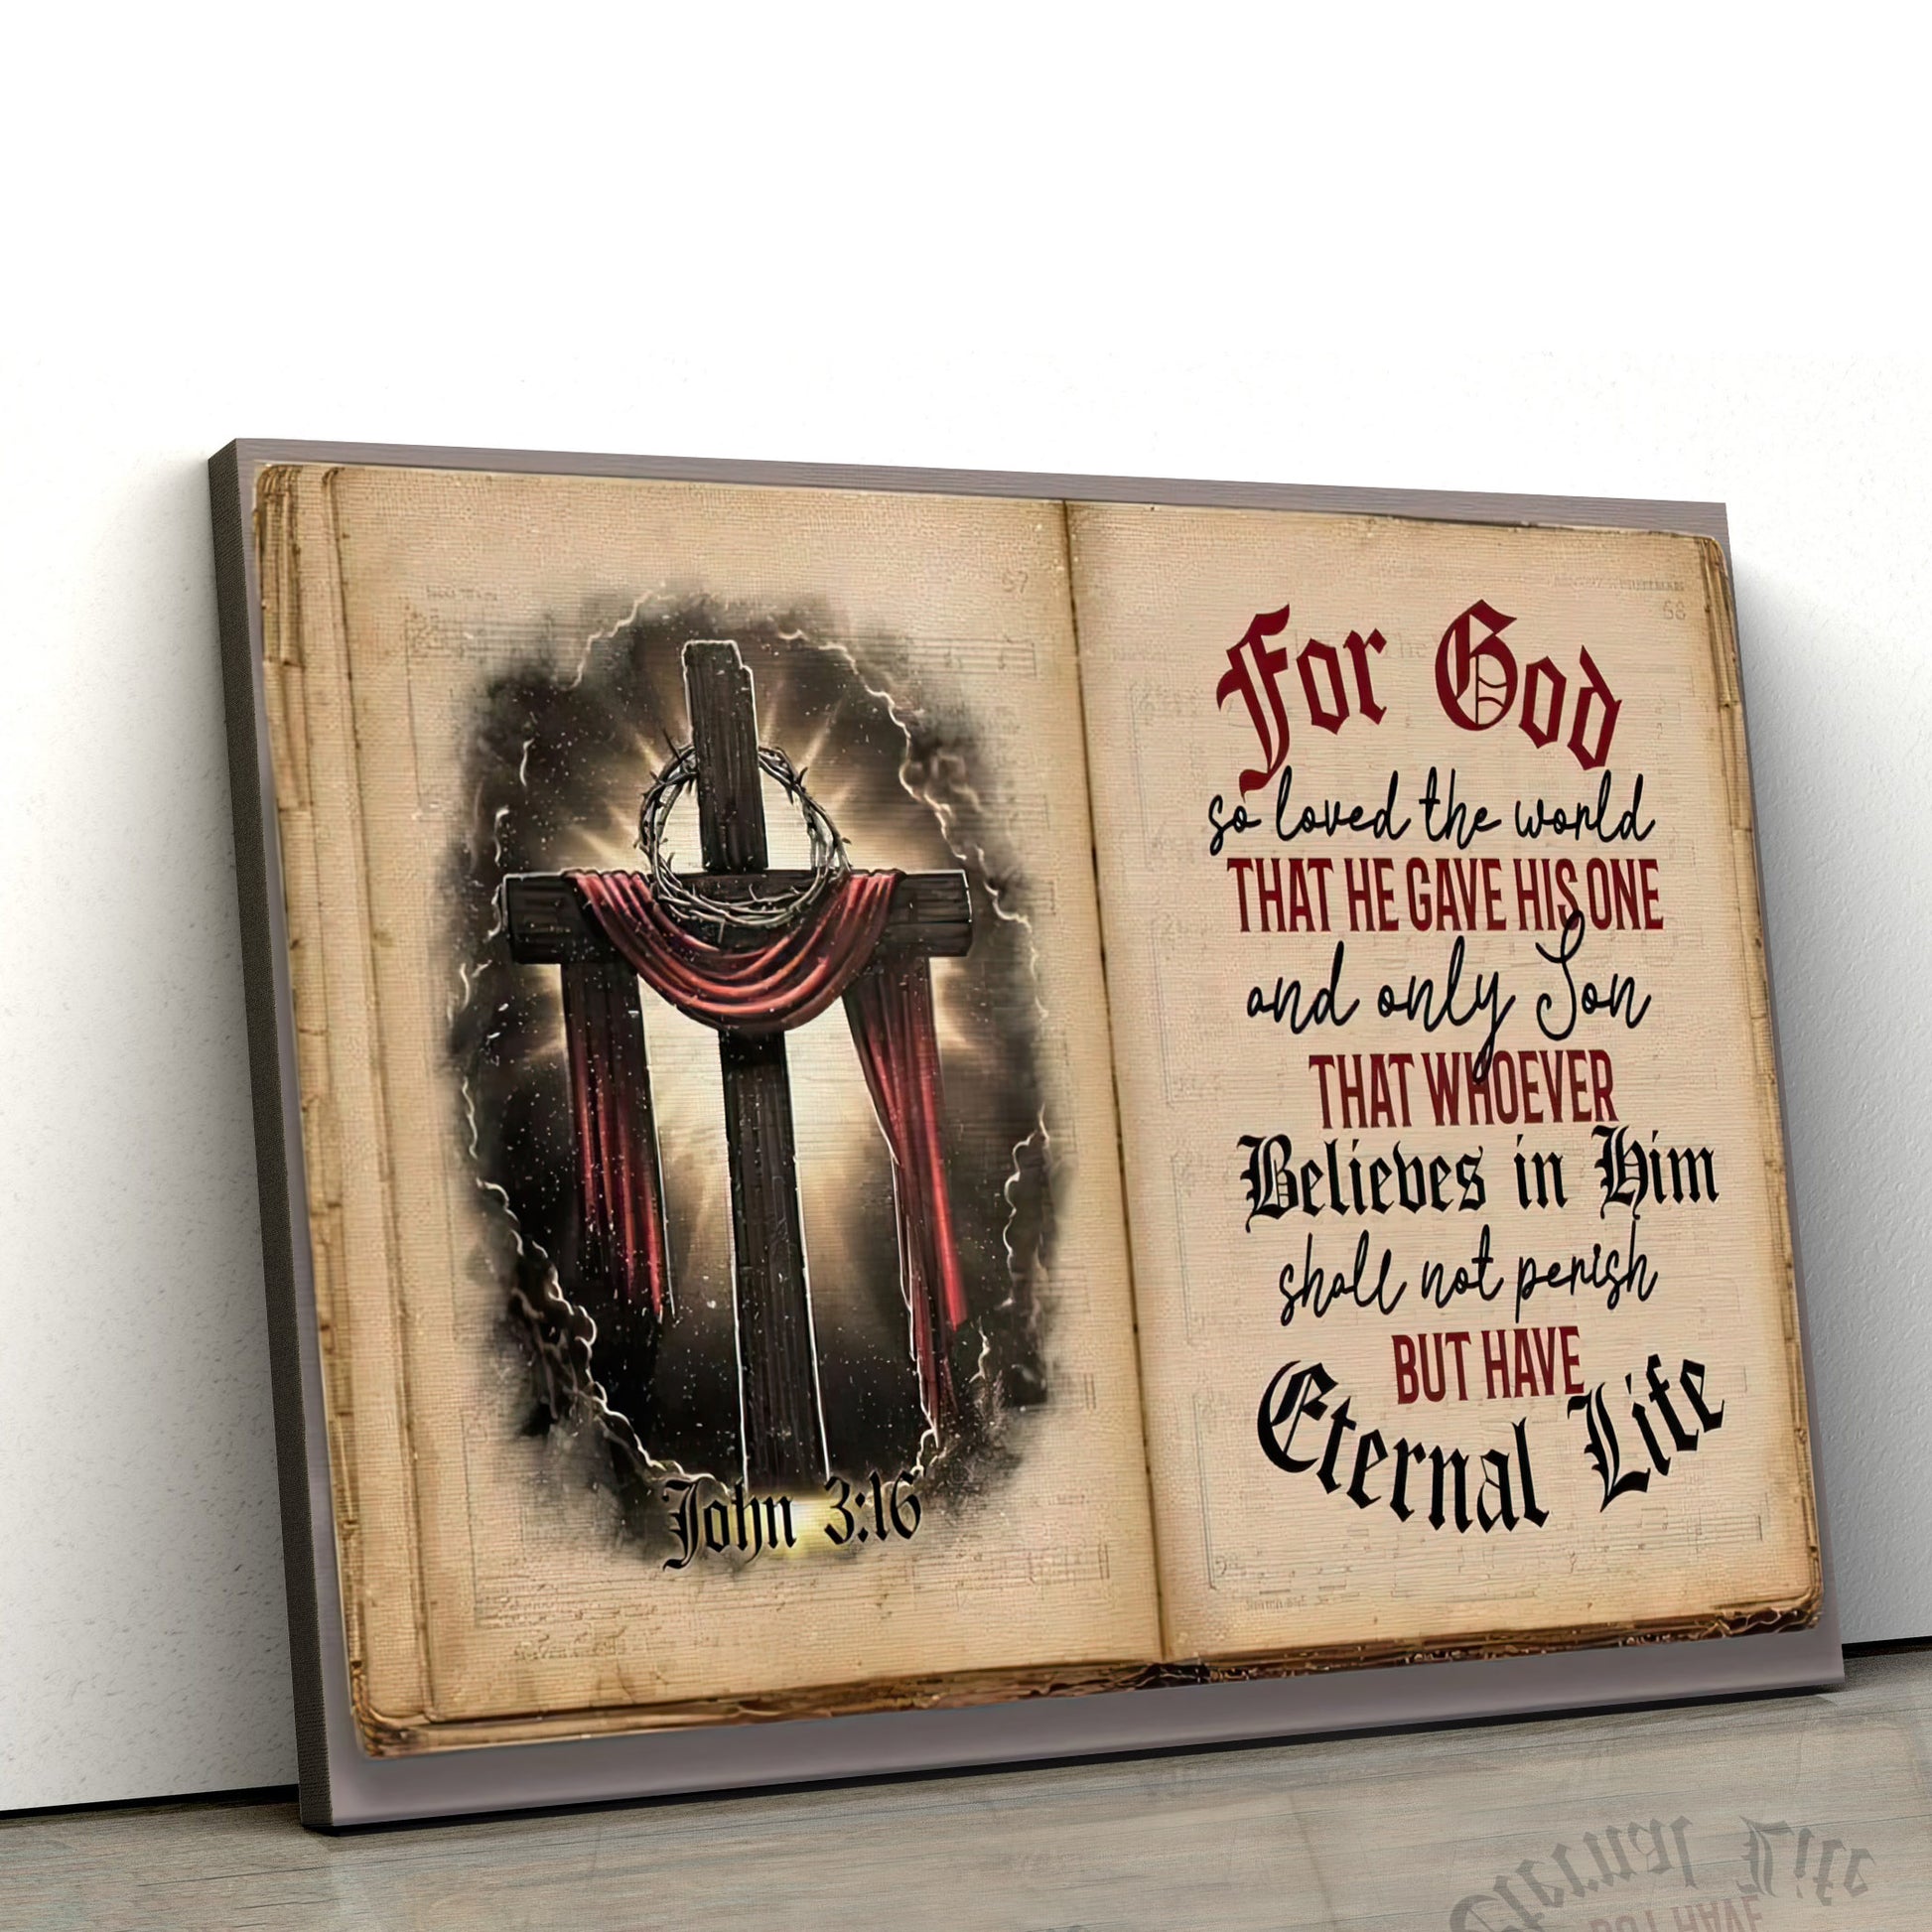 John 3 16 Wall Decoration - For God So Loved The World Bible Verse Canvas Painting